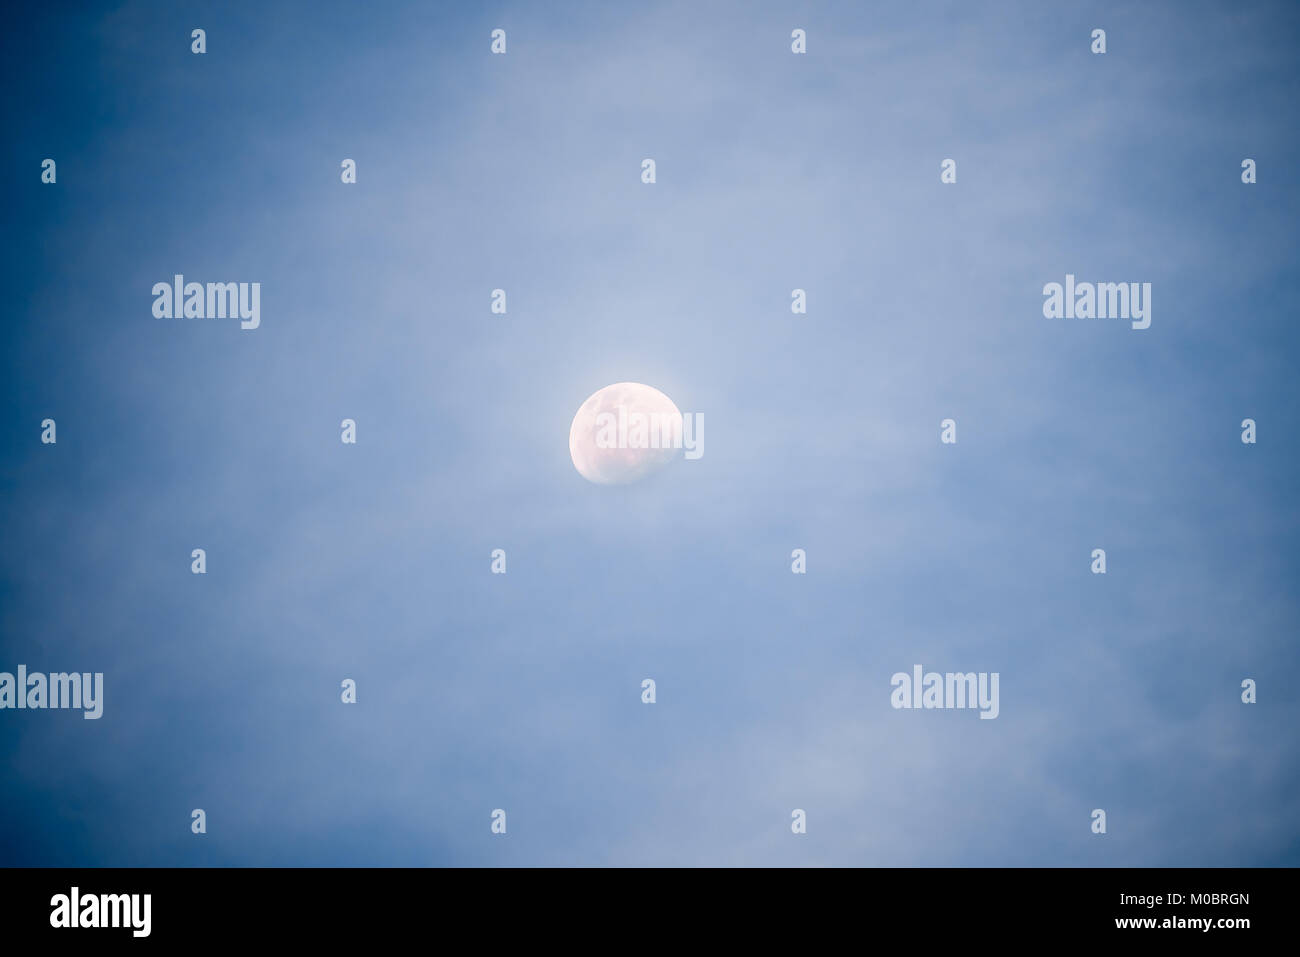 Waxing gibbous moon at night with illuminated sky and clouds Stock Photo